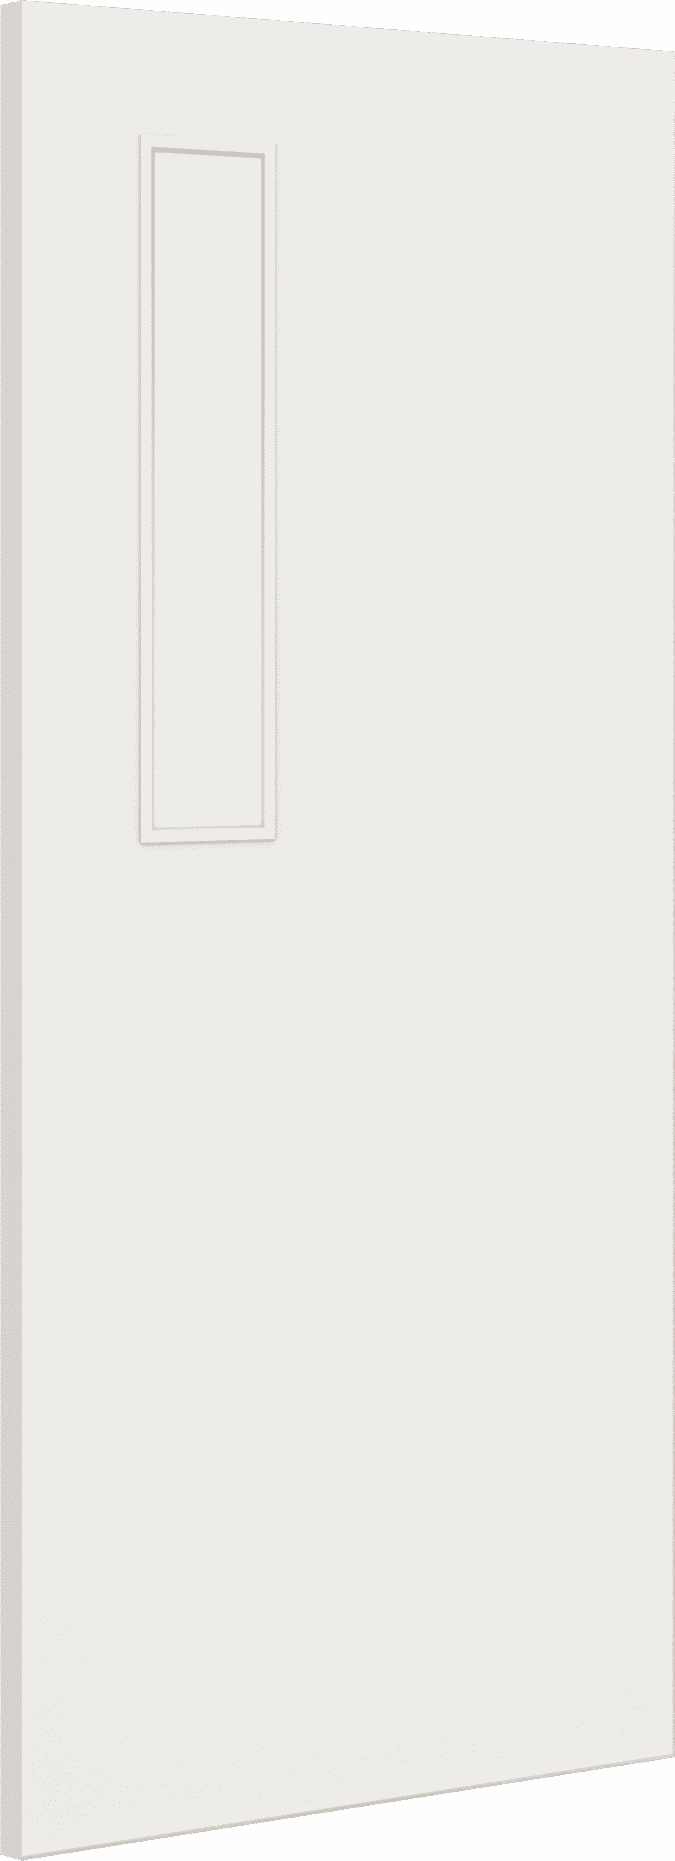 1981mm x 686mm x 44mm (27") Architectural Paint Grade White 08 Clear Glazed Fire Door Blank